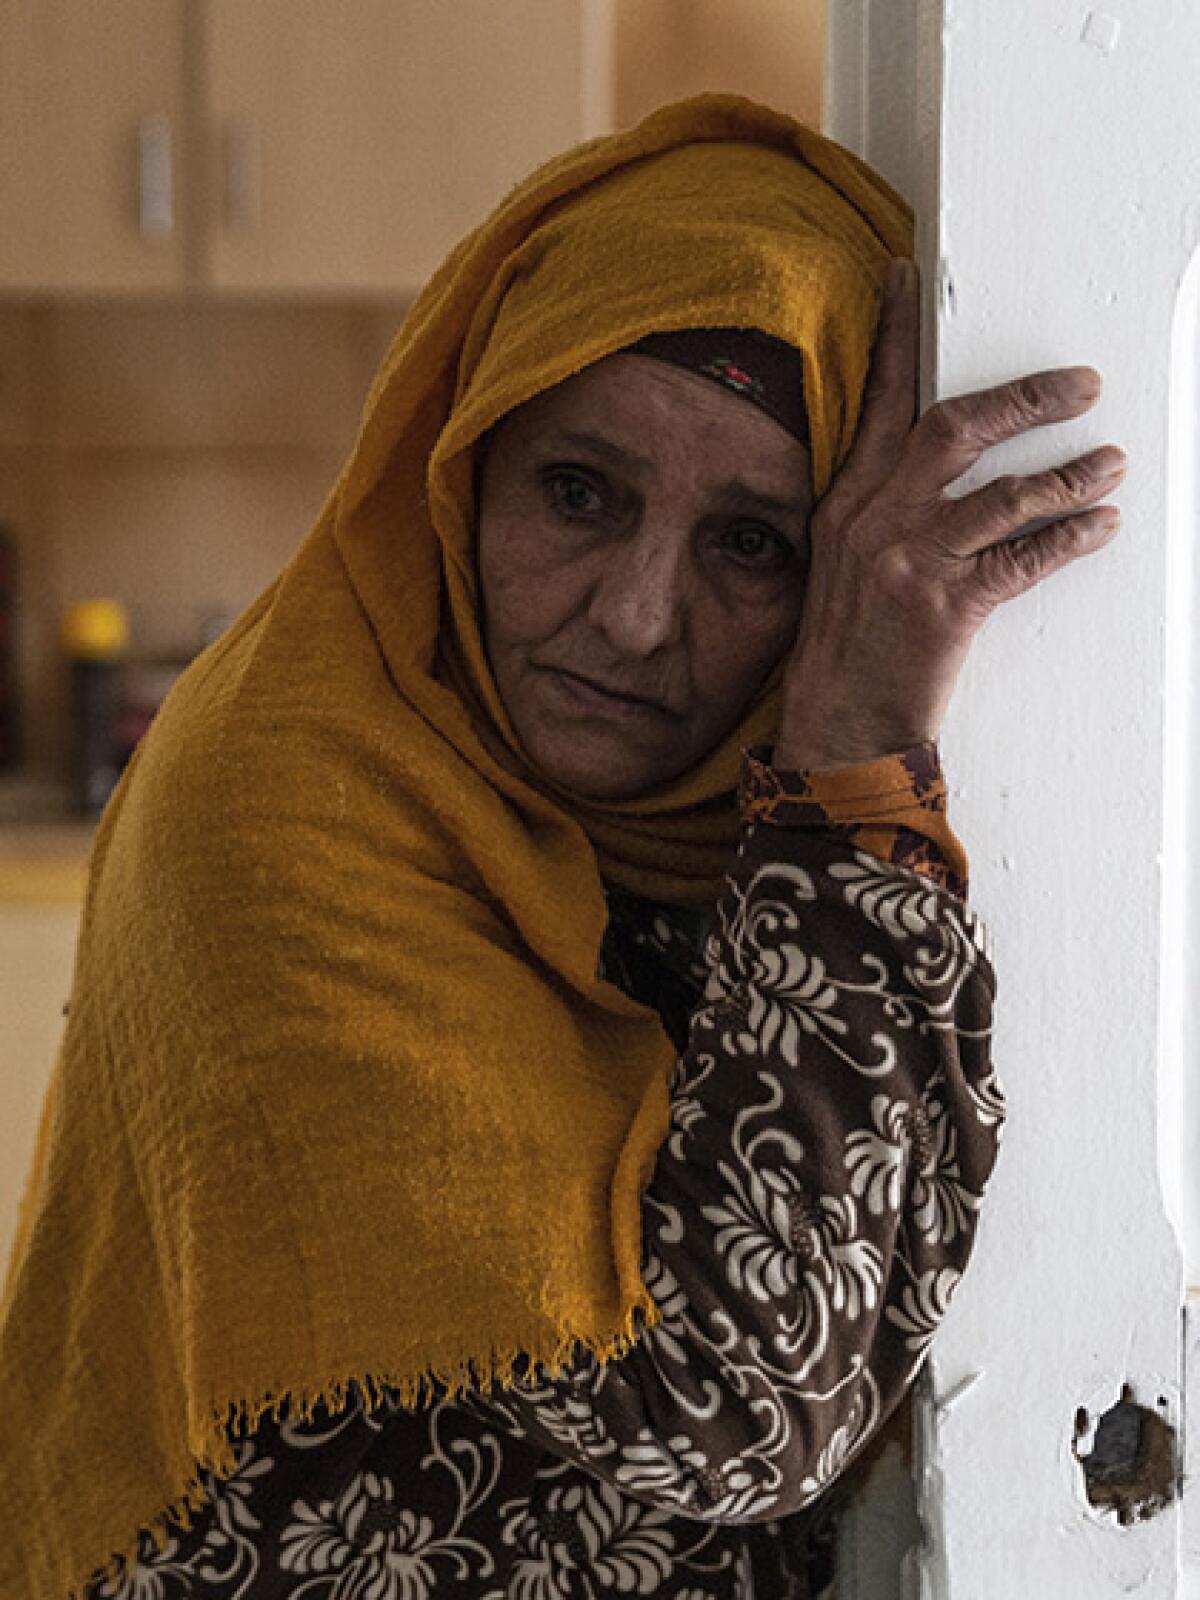 In 2014, Kalaia’s mother, Zina Sehi, now 68, tried to burn herself to death in front of the president’s palace in Tunis.